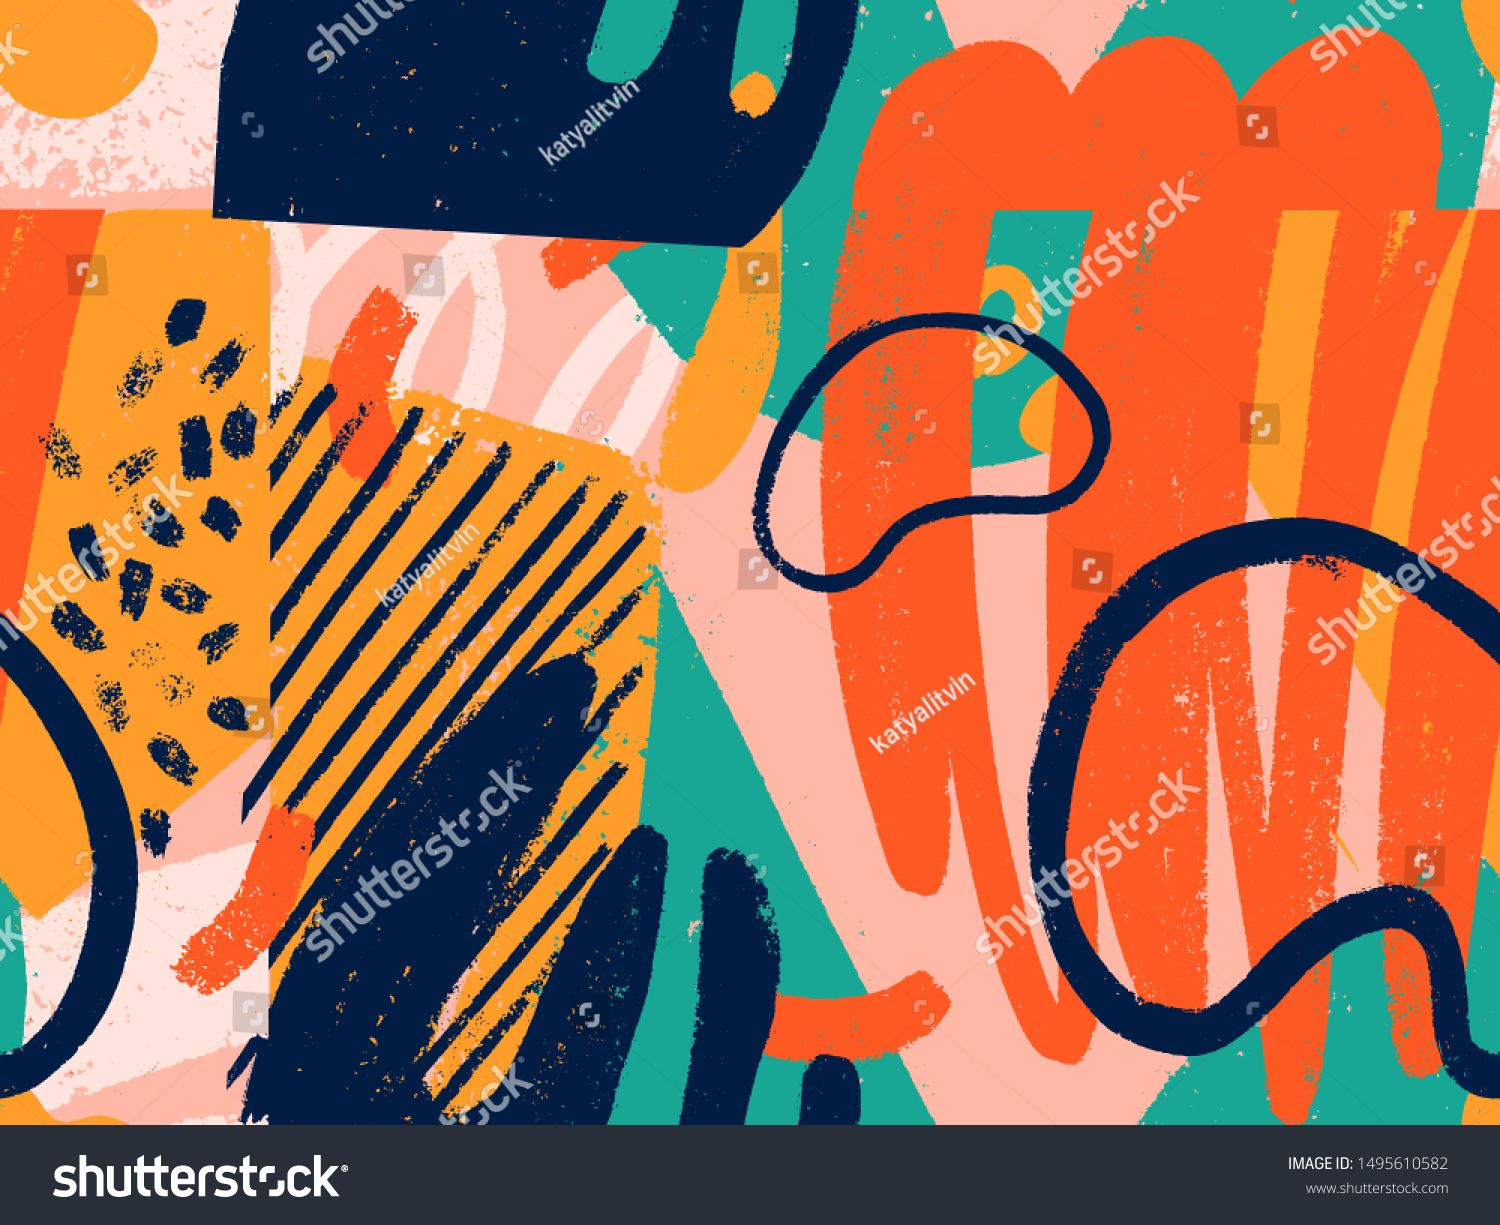 Creative doodle art seamless pattern with different shapes and textures. Collage. Vector #1495610582